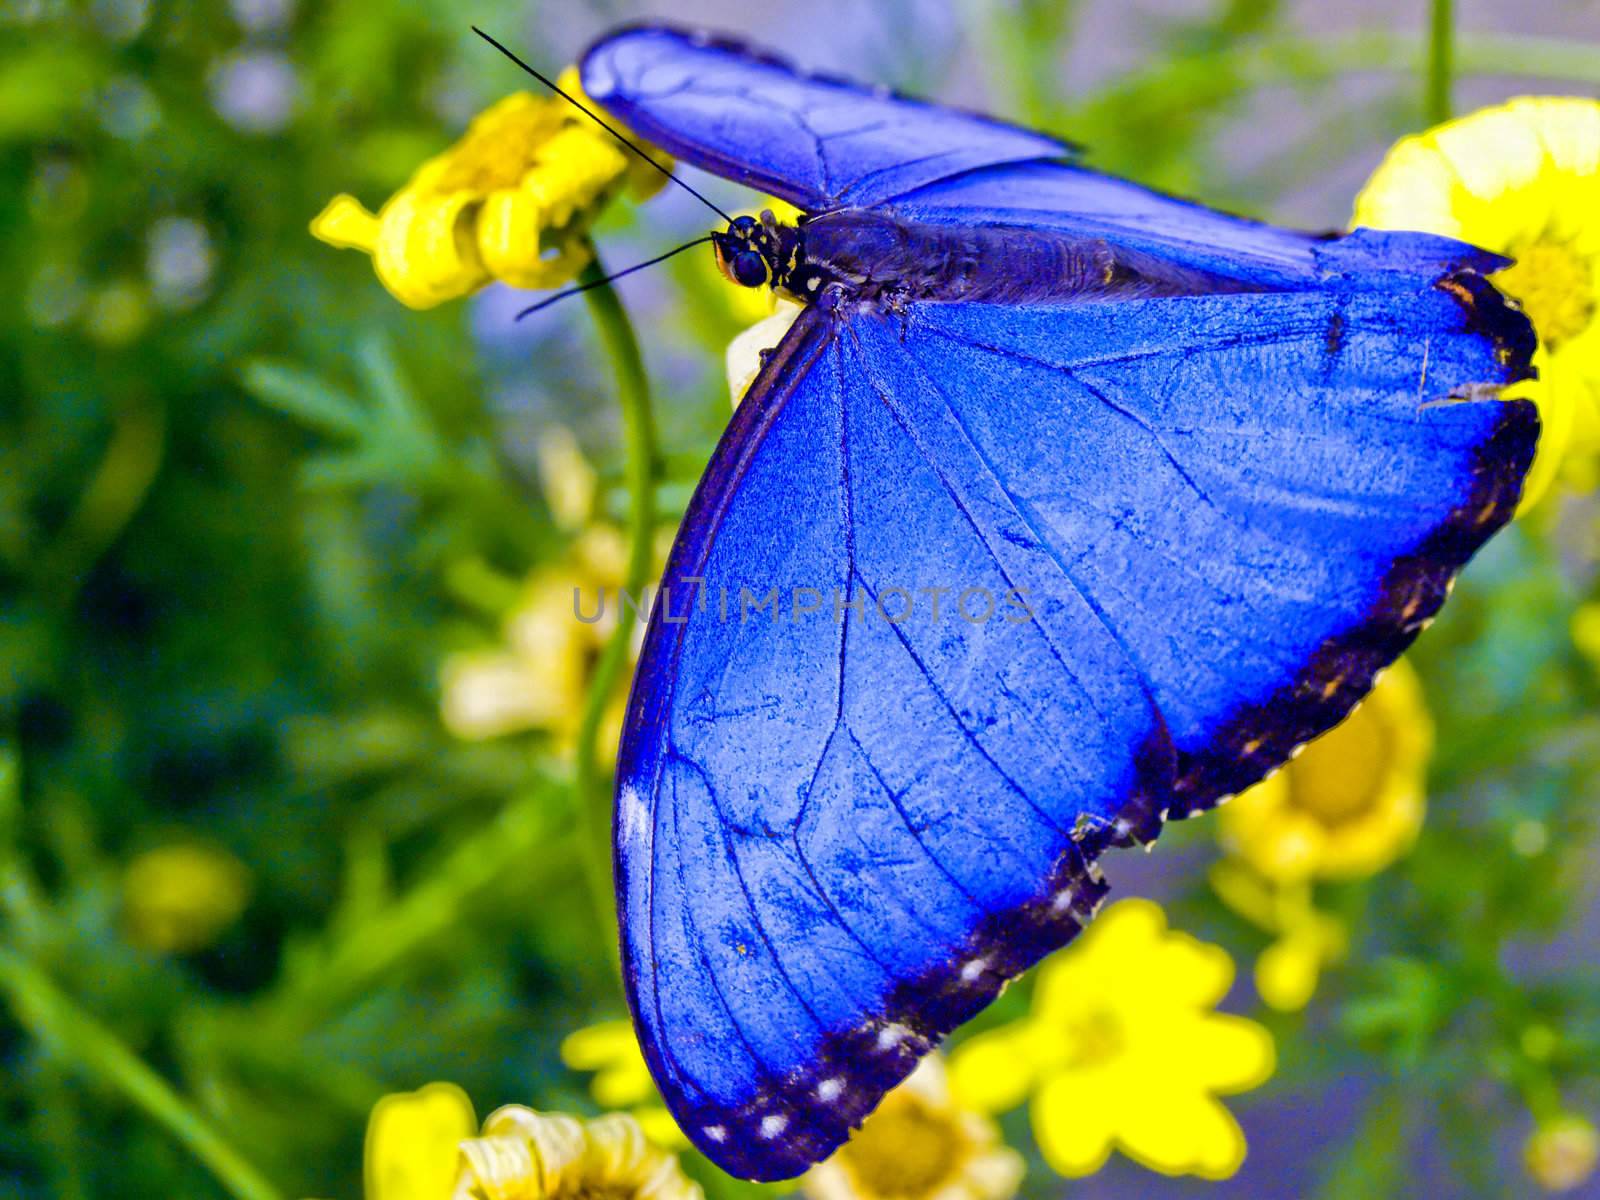 Bright blue butterfly spreds her wings while on a flower.